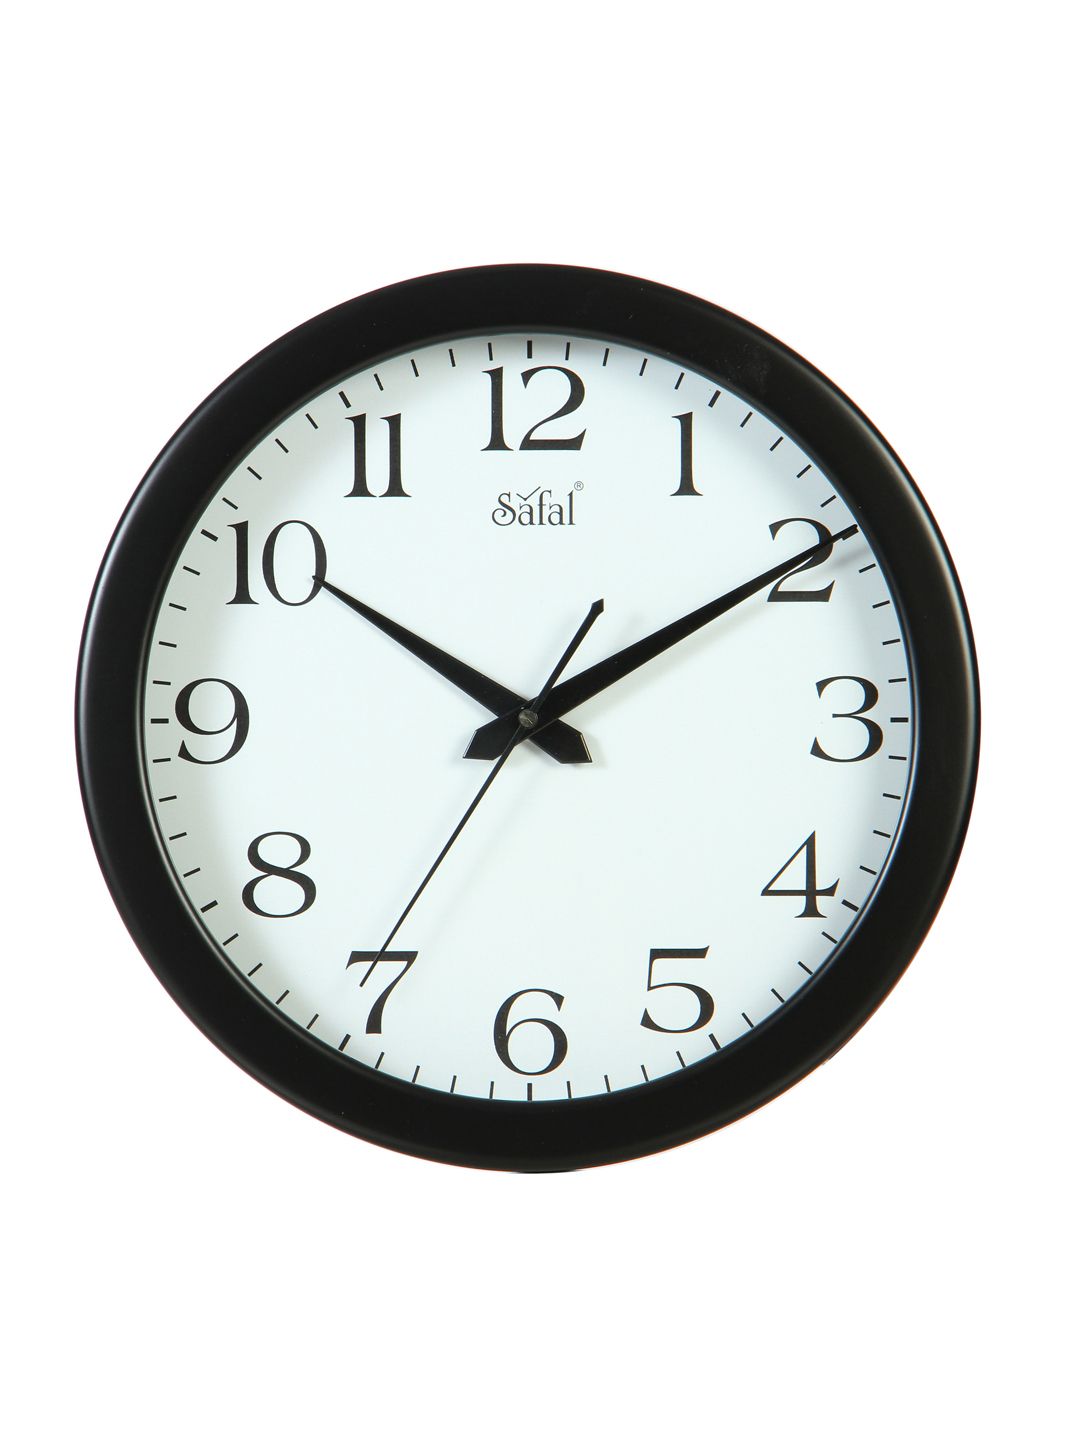 Safal Black & White Dial 28 cm Analogue Wall Clock Price in India